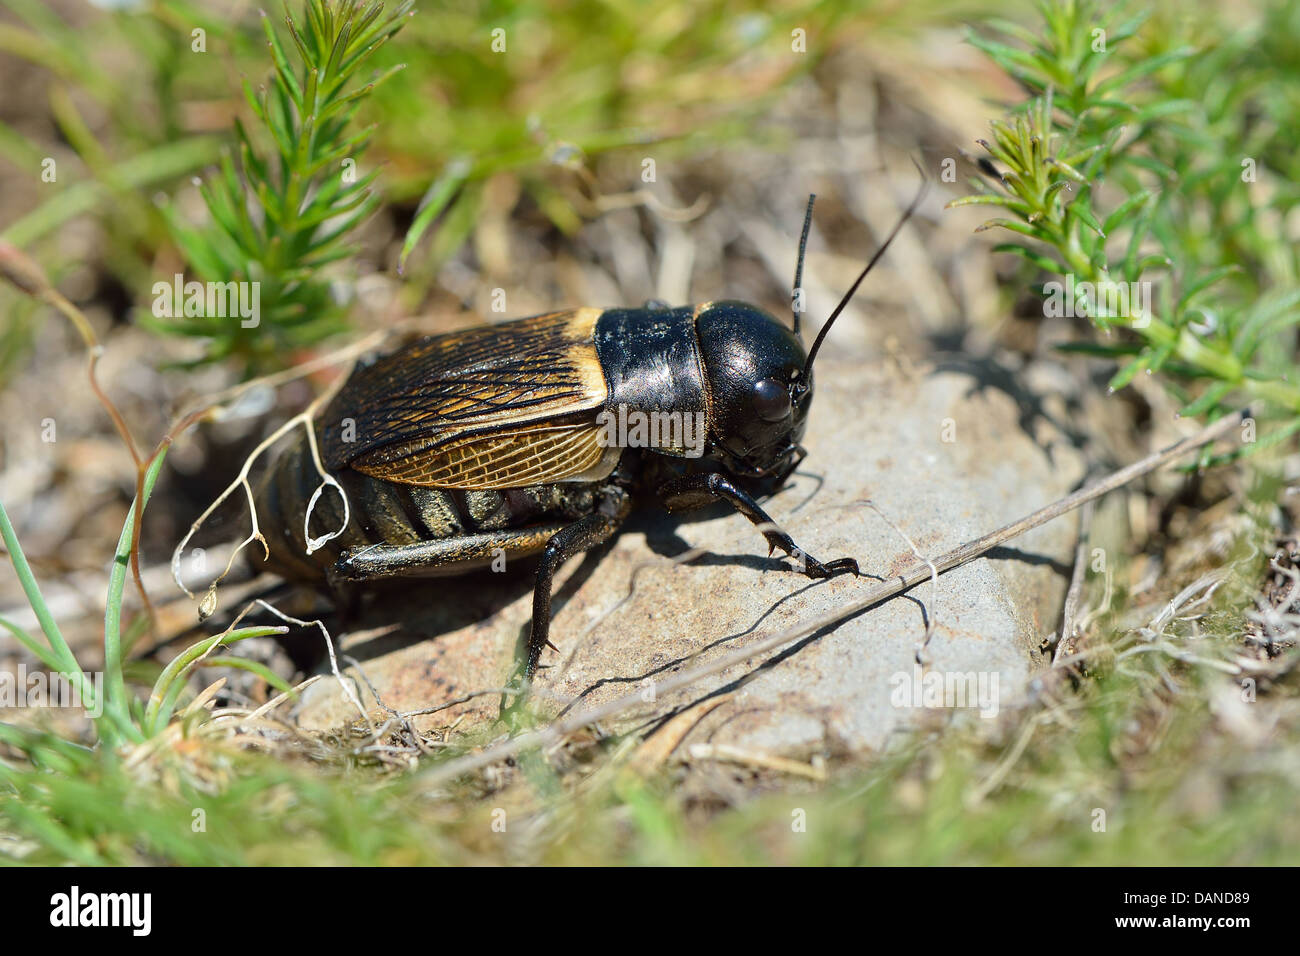 Field Cricket (Gryllus campestris) endangered species declining and red-listed in many countries of Europe Stock Photo